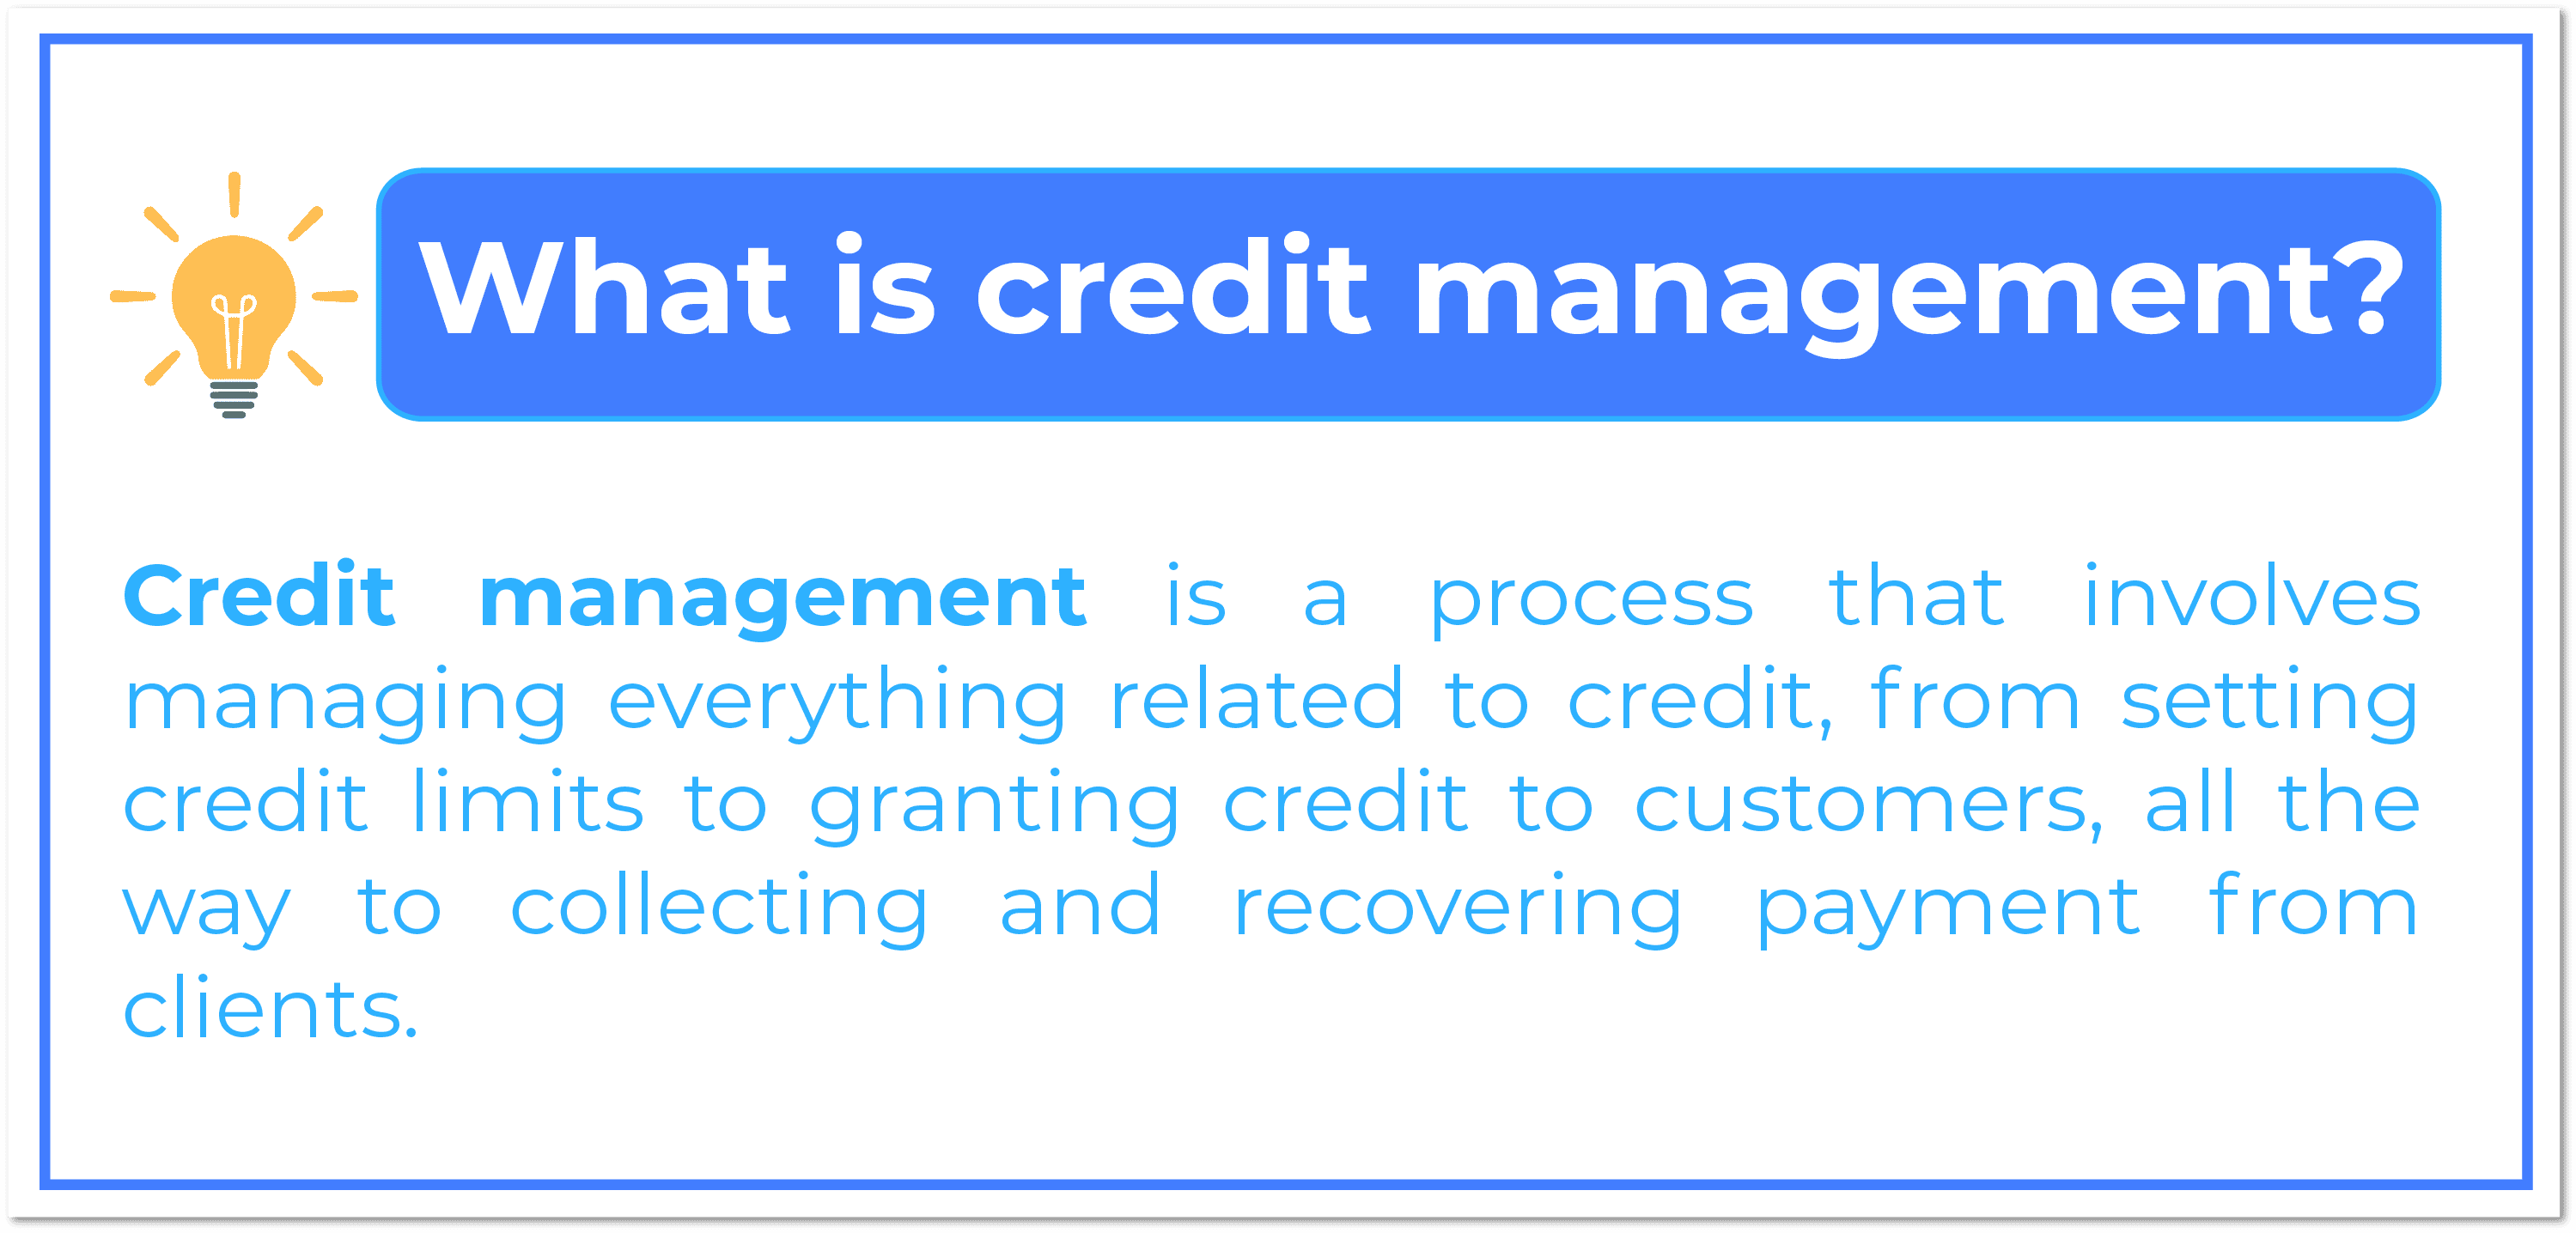 What is credit management